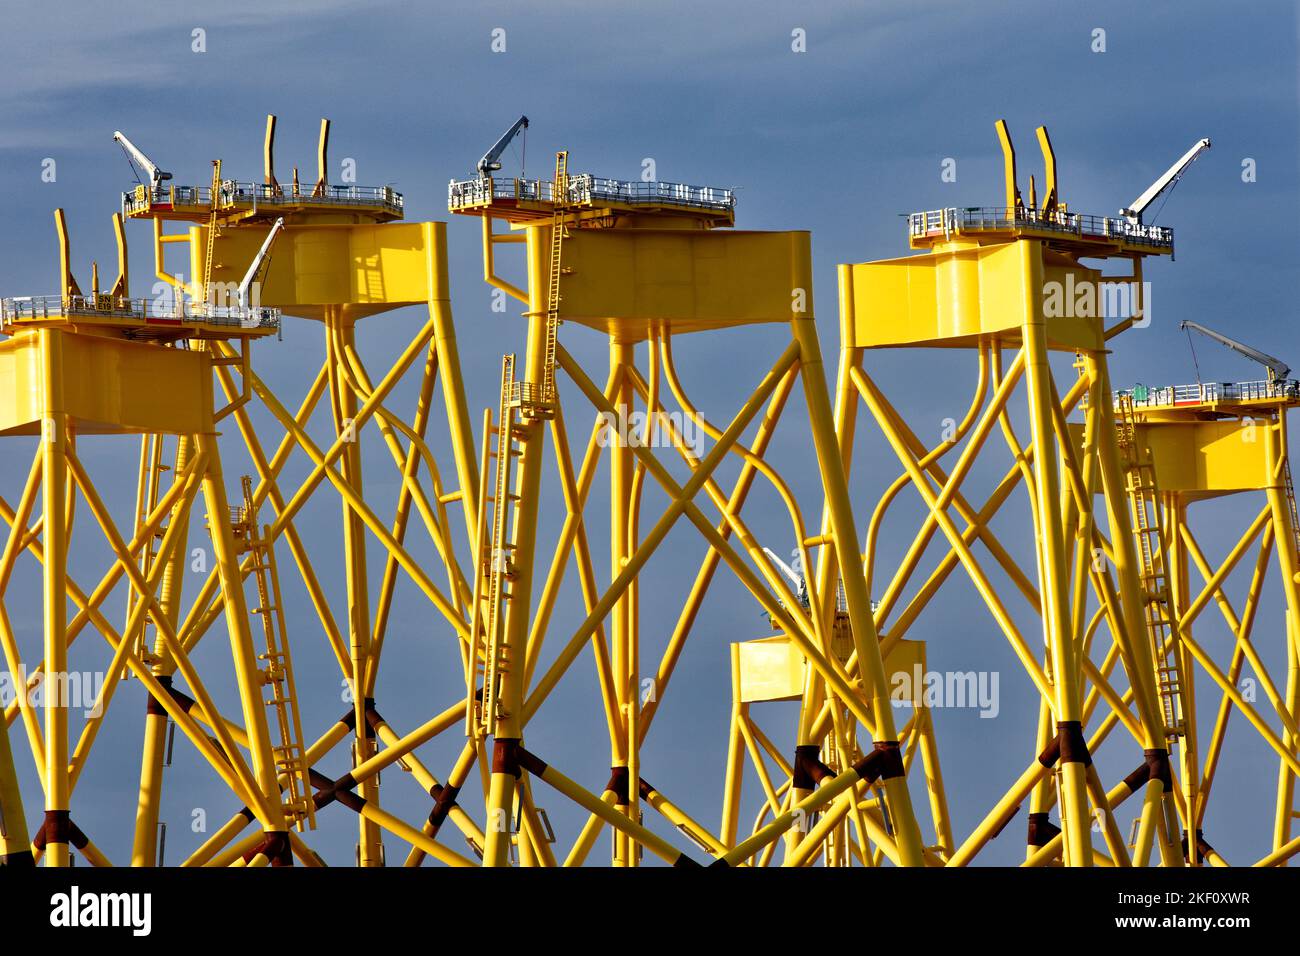 Cromarty Firth Scotland Nigg the top part of yellow bases or yellow jackets for off shore wind turbines Stock Photo